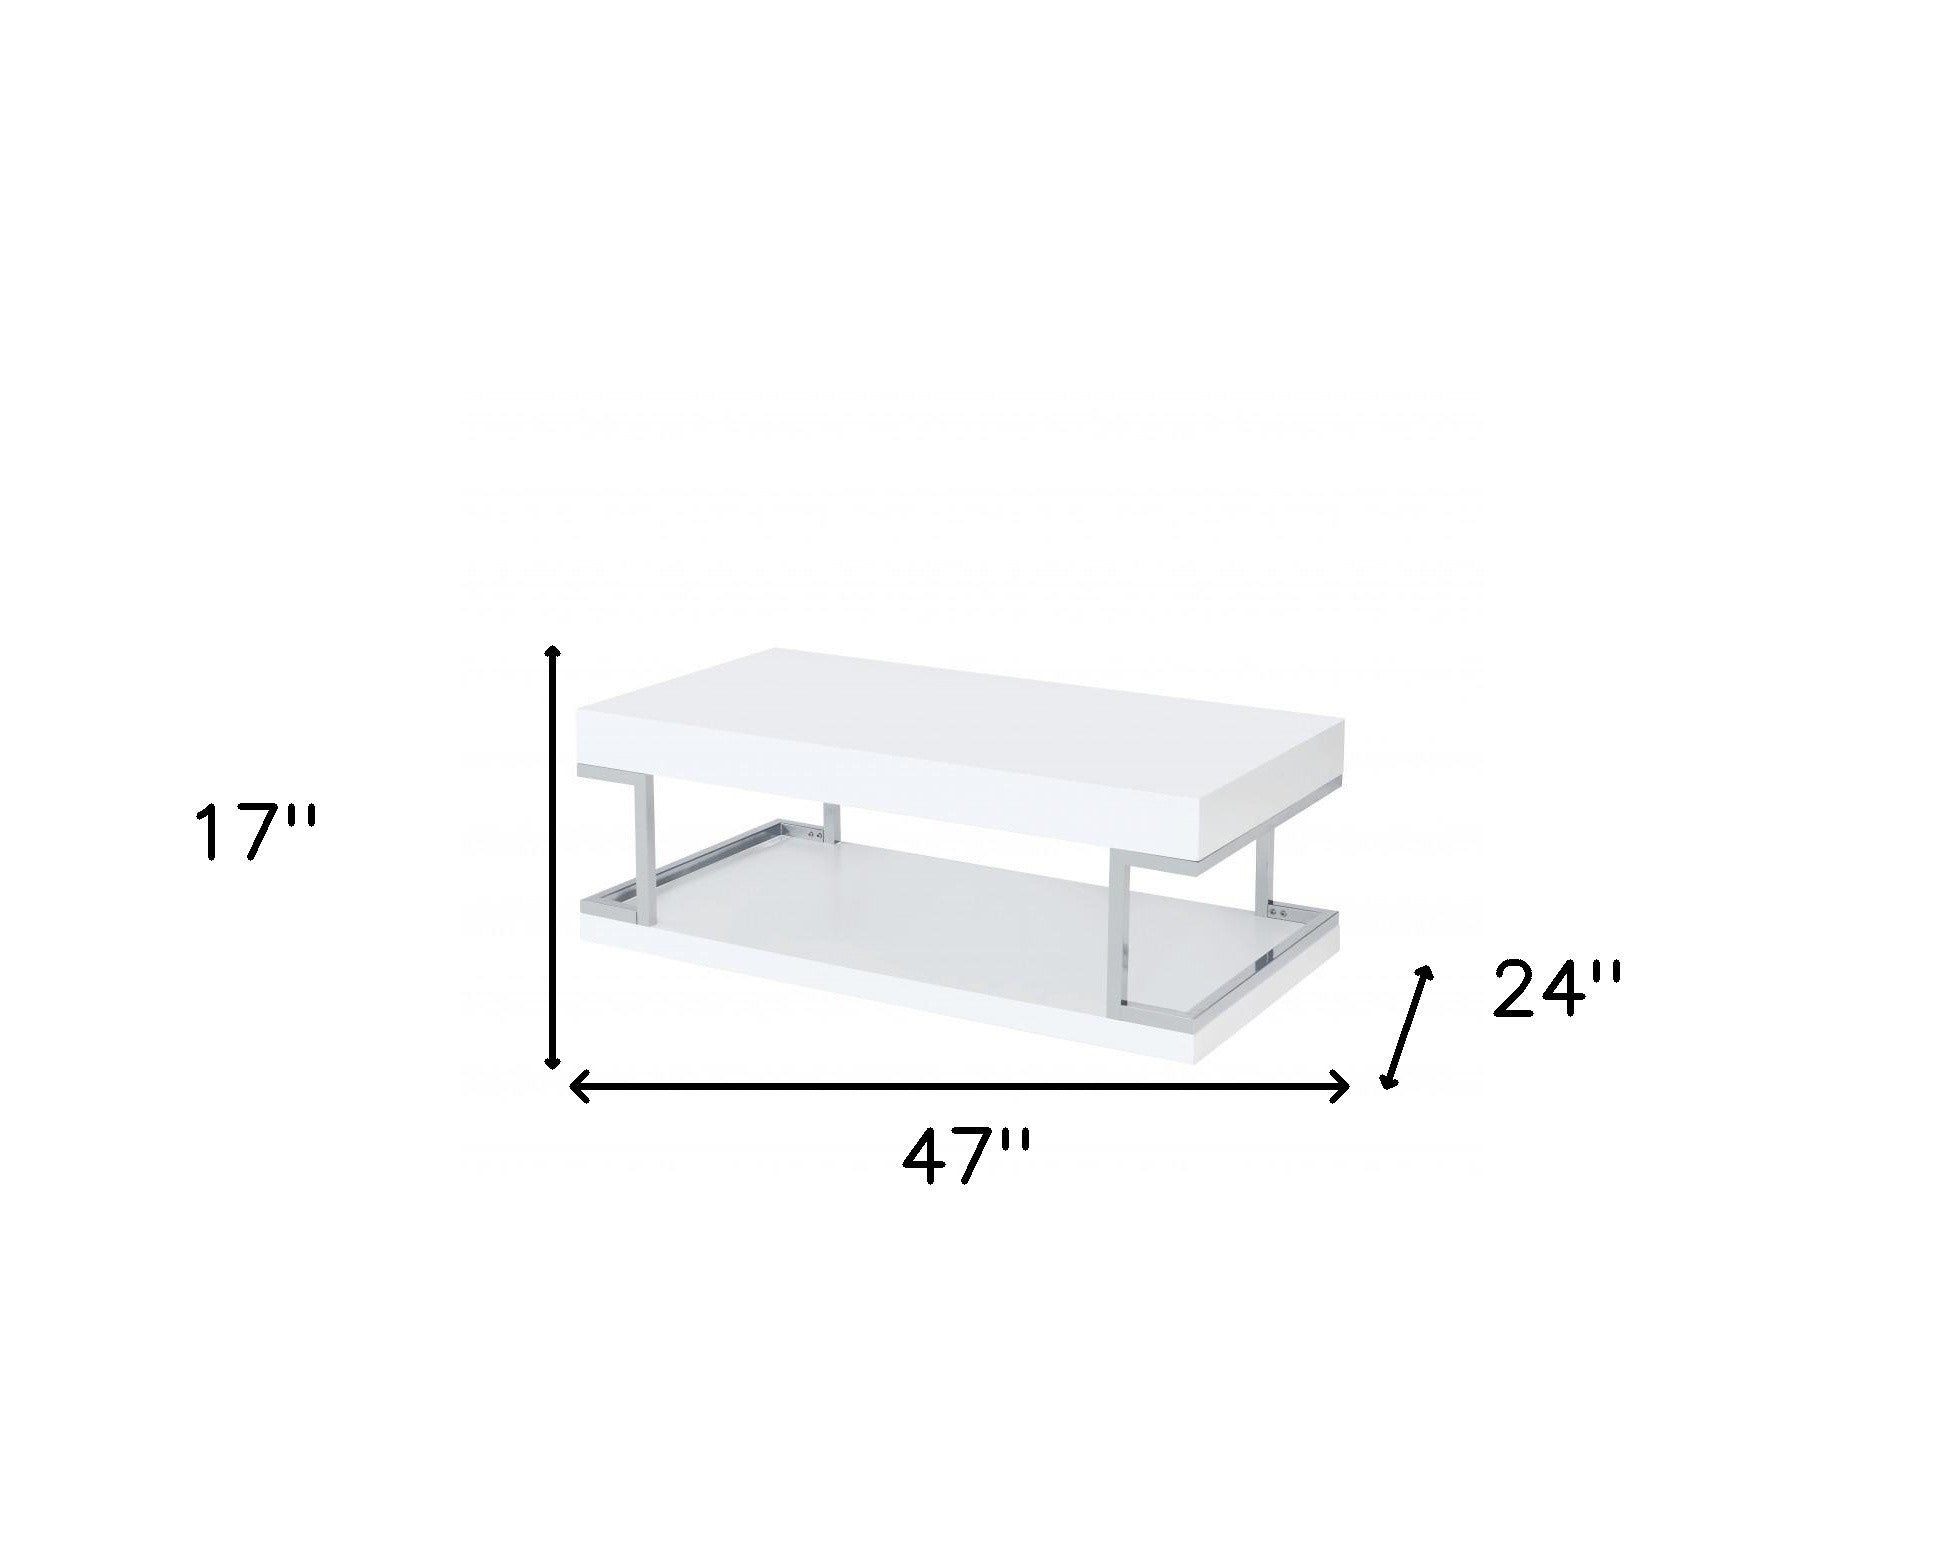 47" Chrome And White High Gloss Manufactured Wood And Metal Rectangular Coffee Table With Shelf